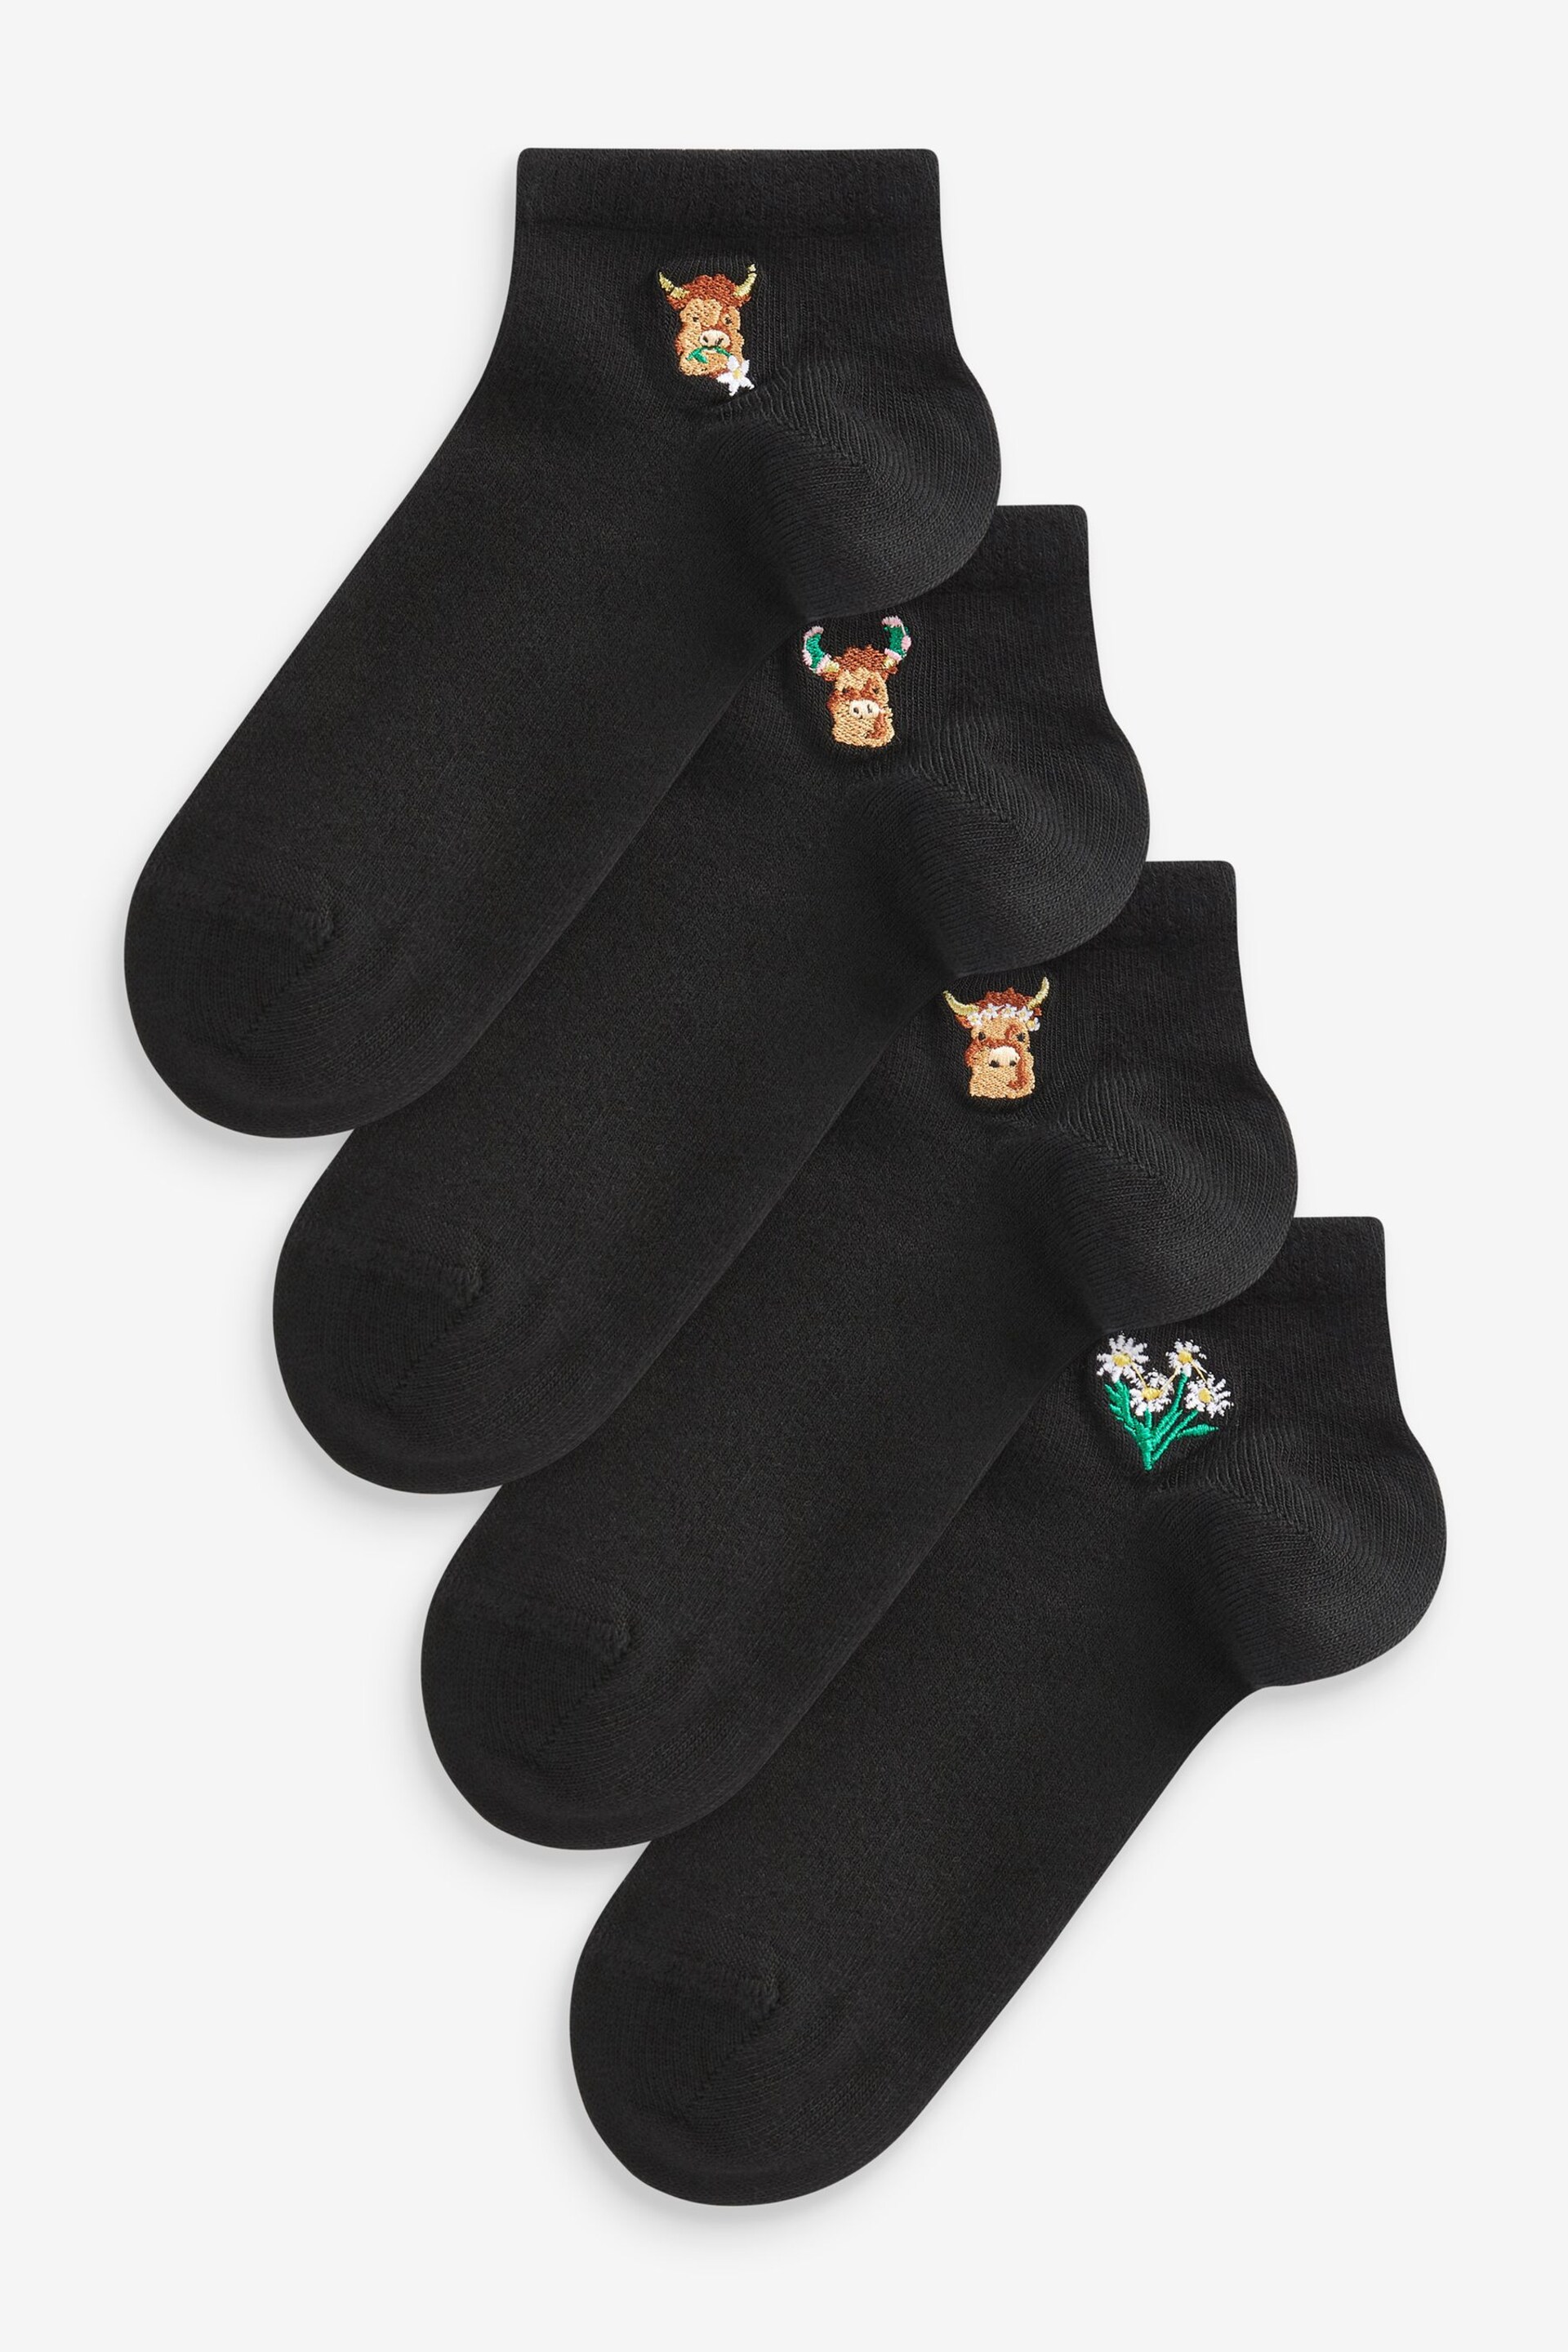 Black Embroidered Hamish The Highland Cow Motif Trainer Socks 4 Pack - Image 1 of 5